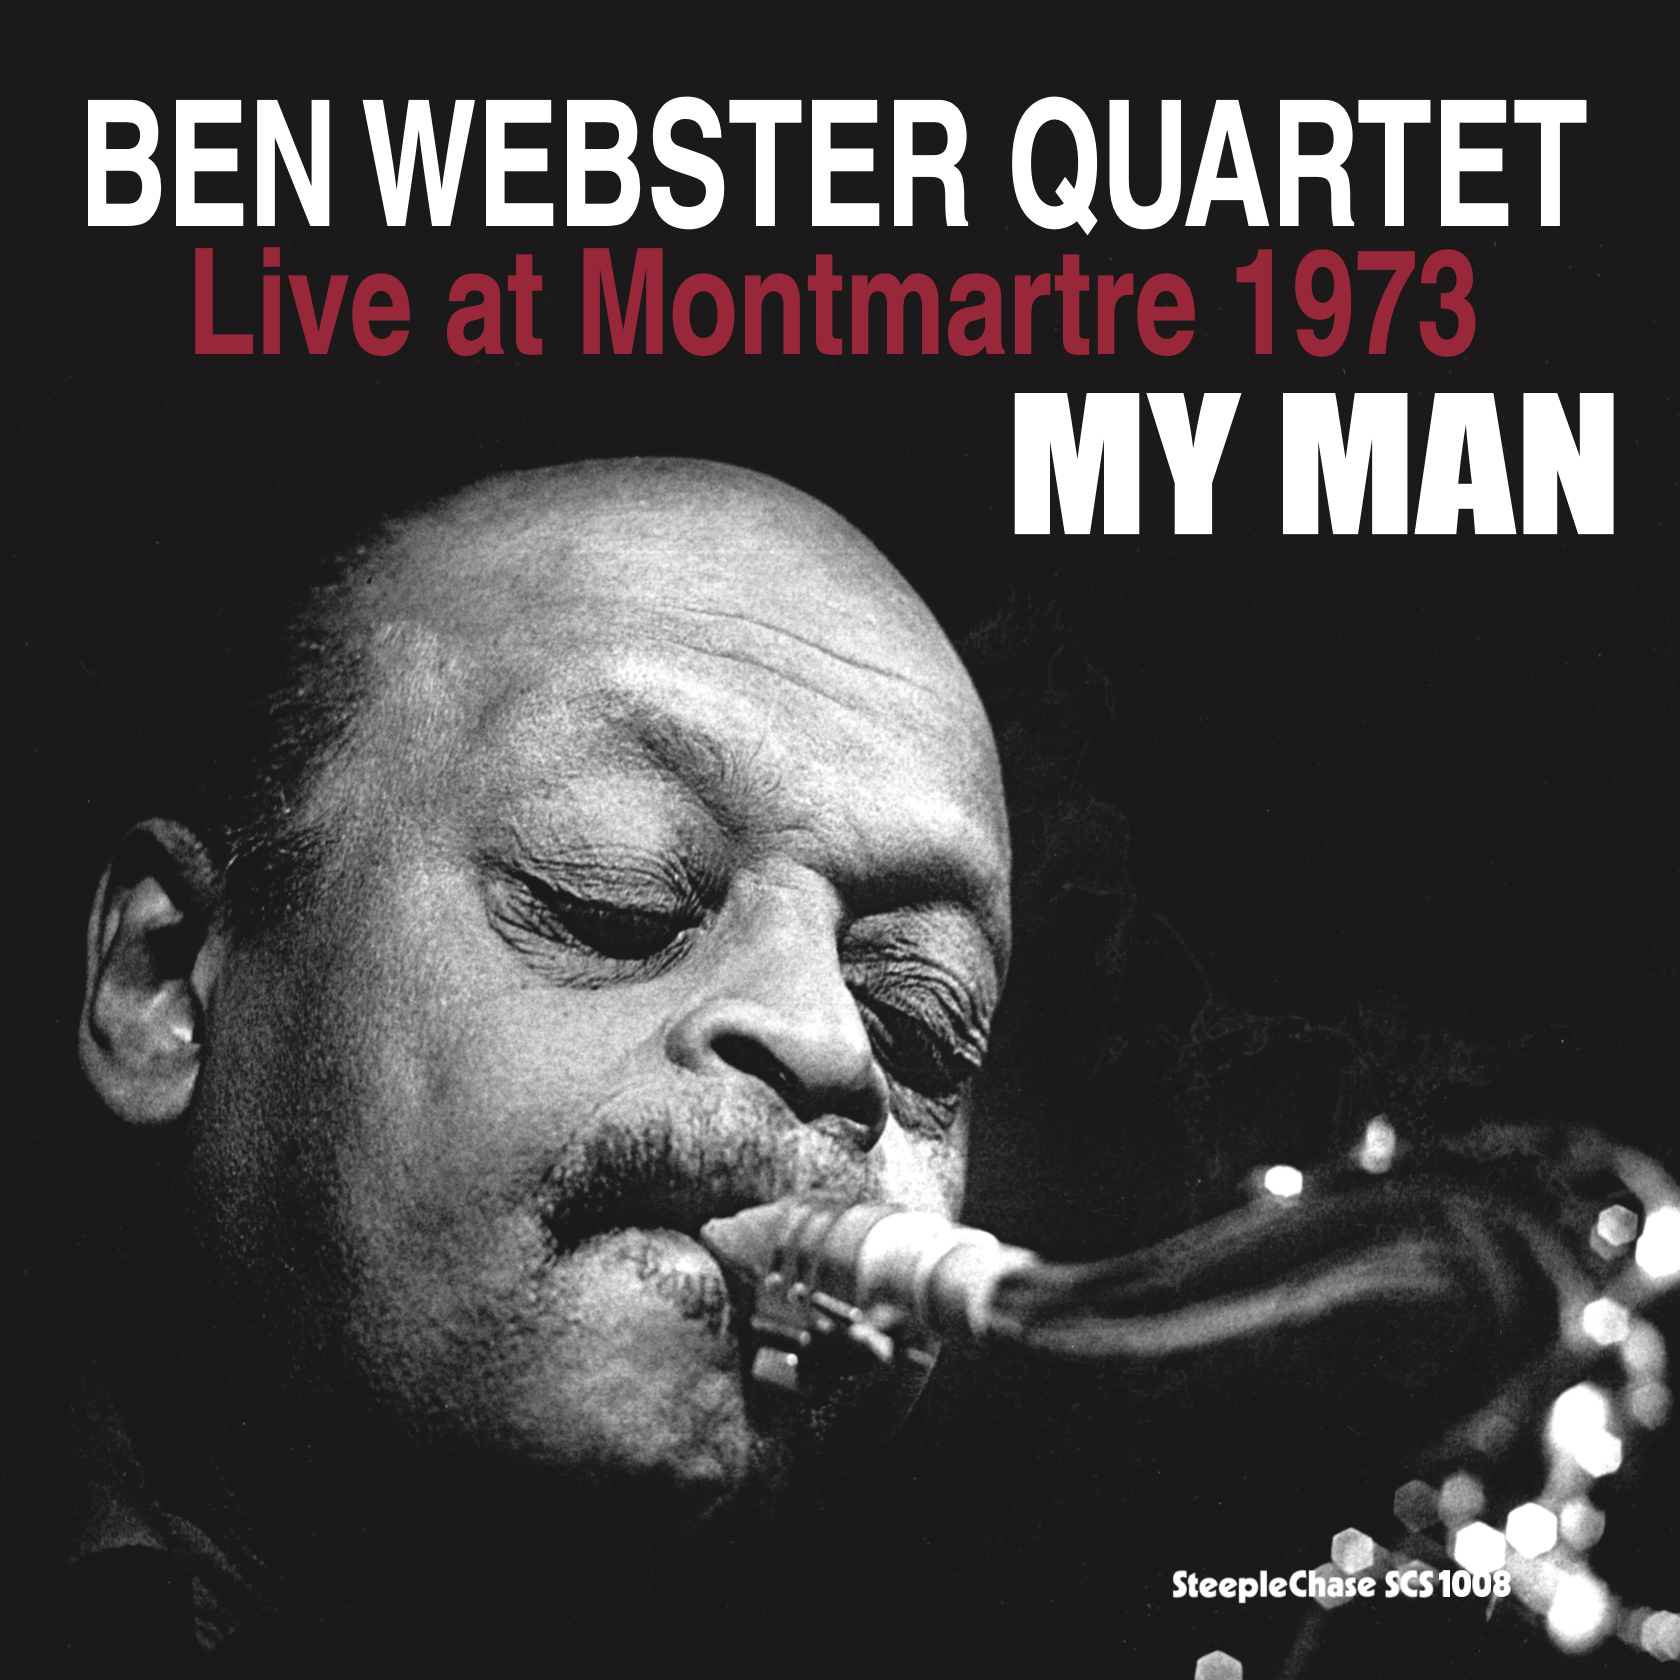 My Man Live at Montmartre 1973 (180g Audiophile Limited Edition)